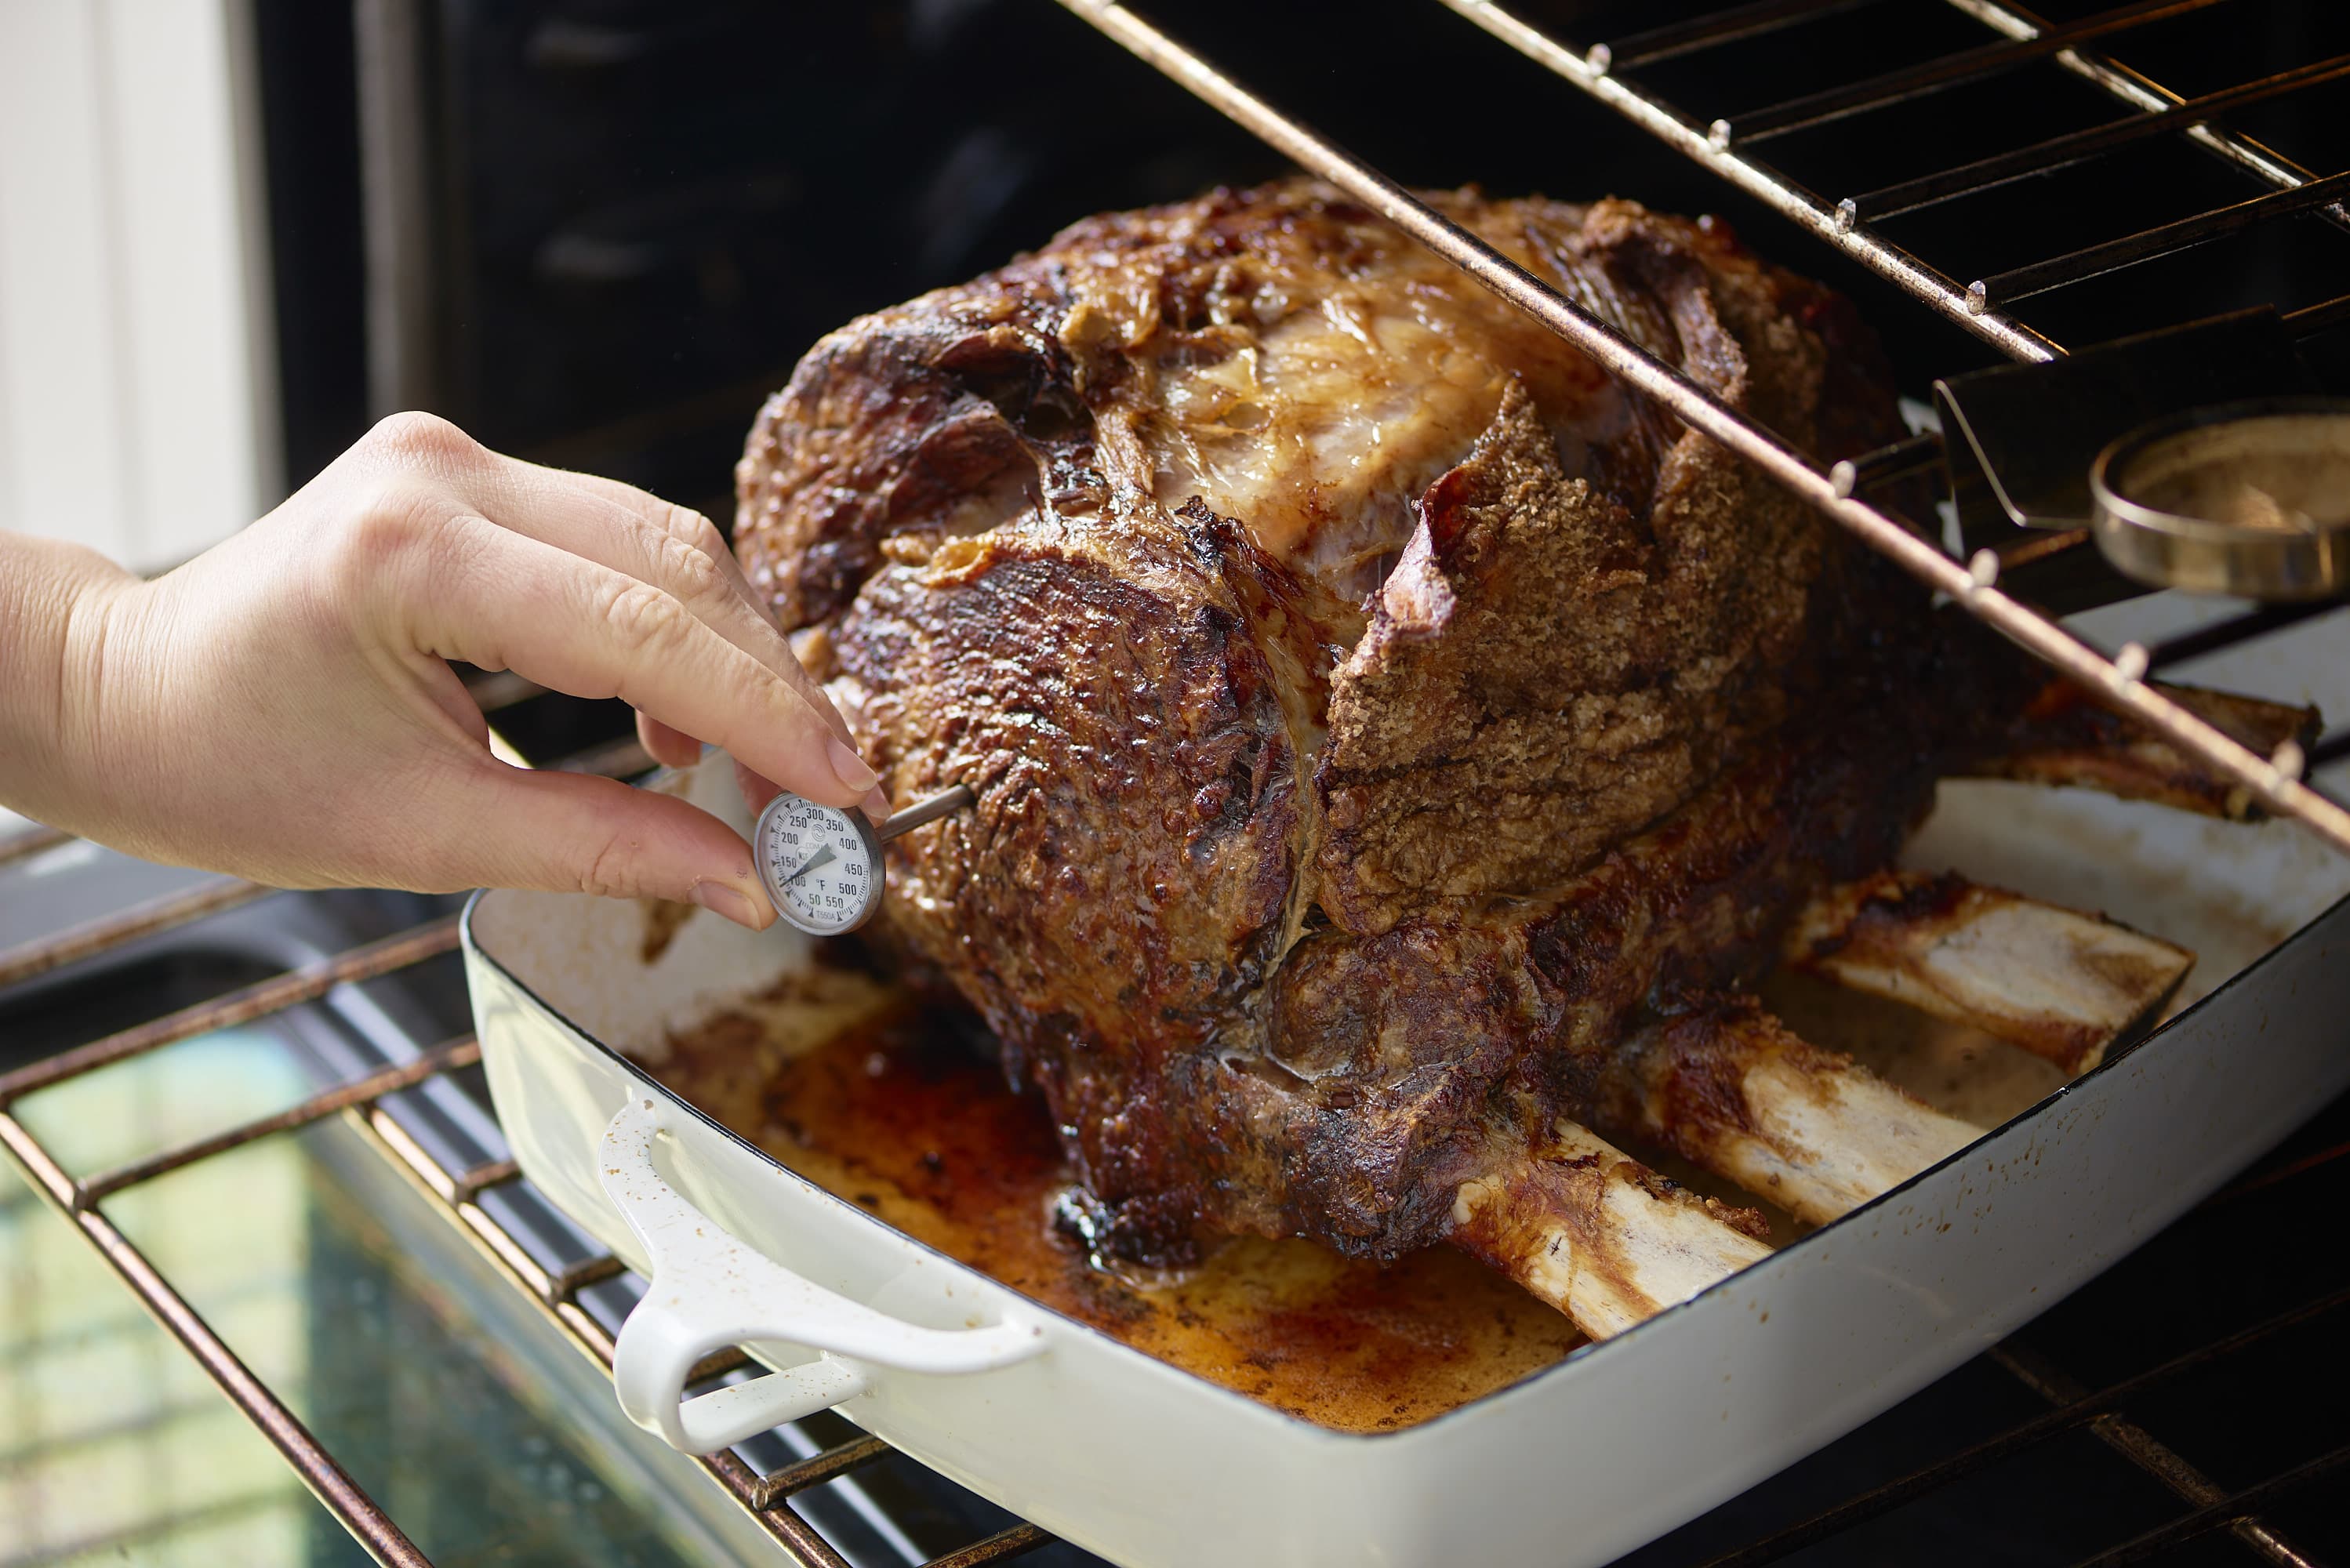 How To Make Prime Rib The Simplest Easiest Method Kitchn After a few hours, the meat is nearly falling off the bone and you'll be licking your fingers in no time. classic prime rib the simplest easiest method